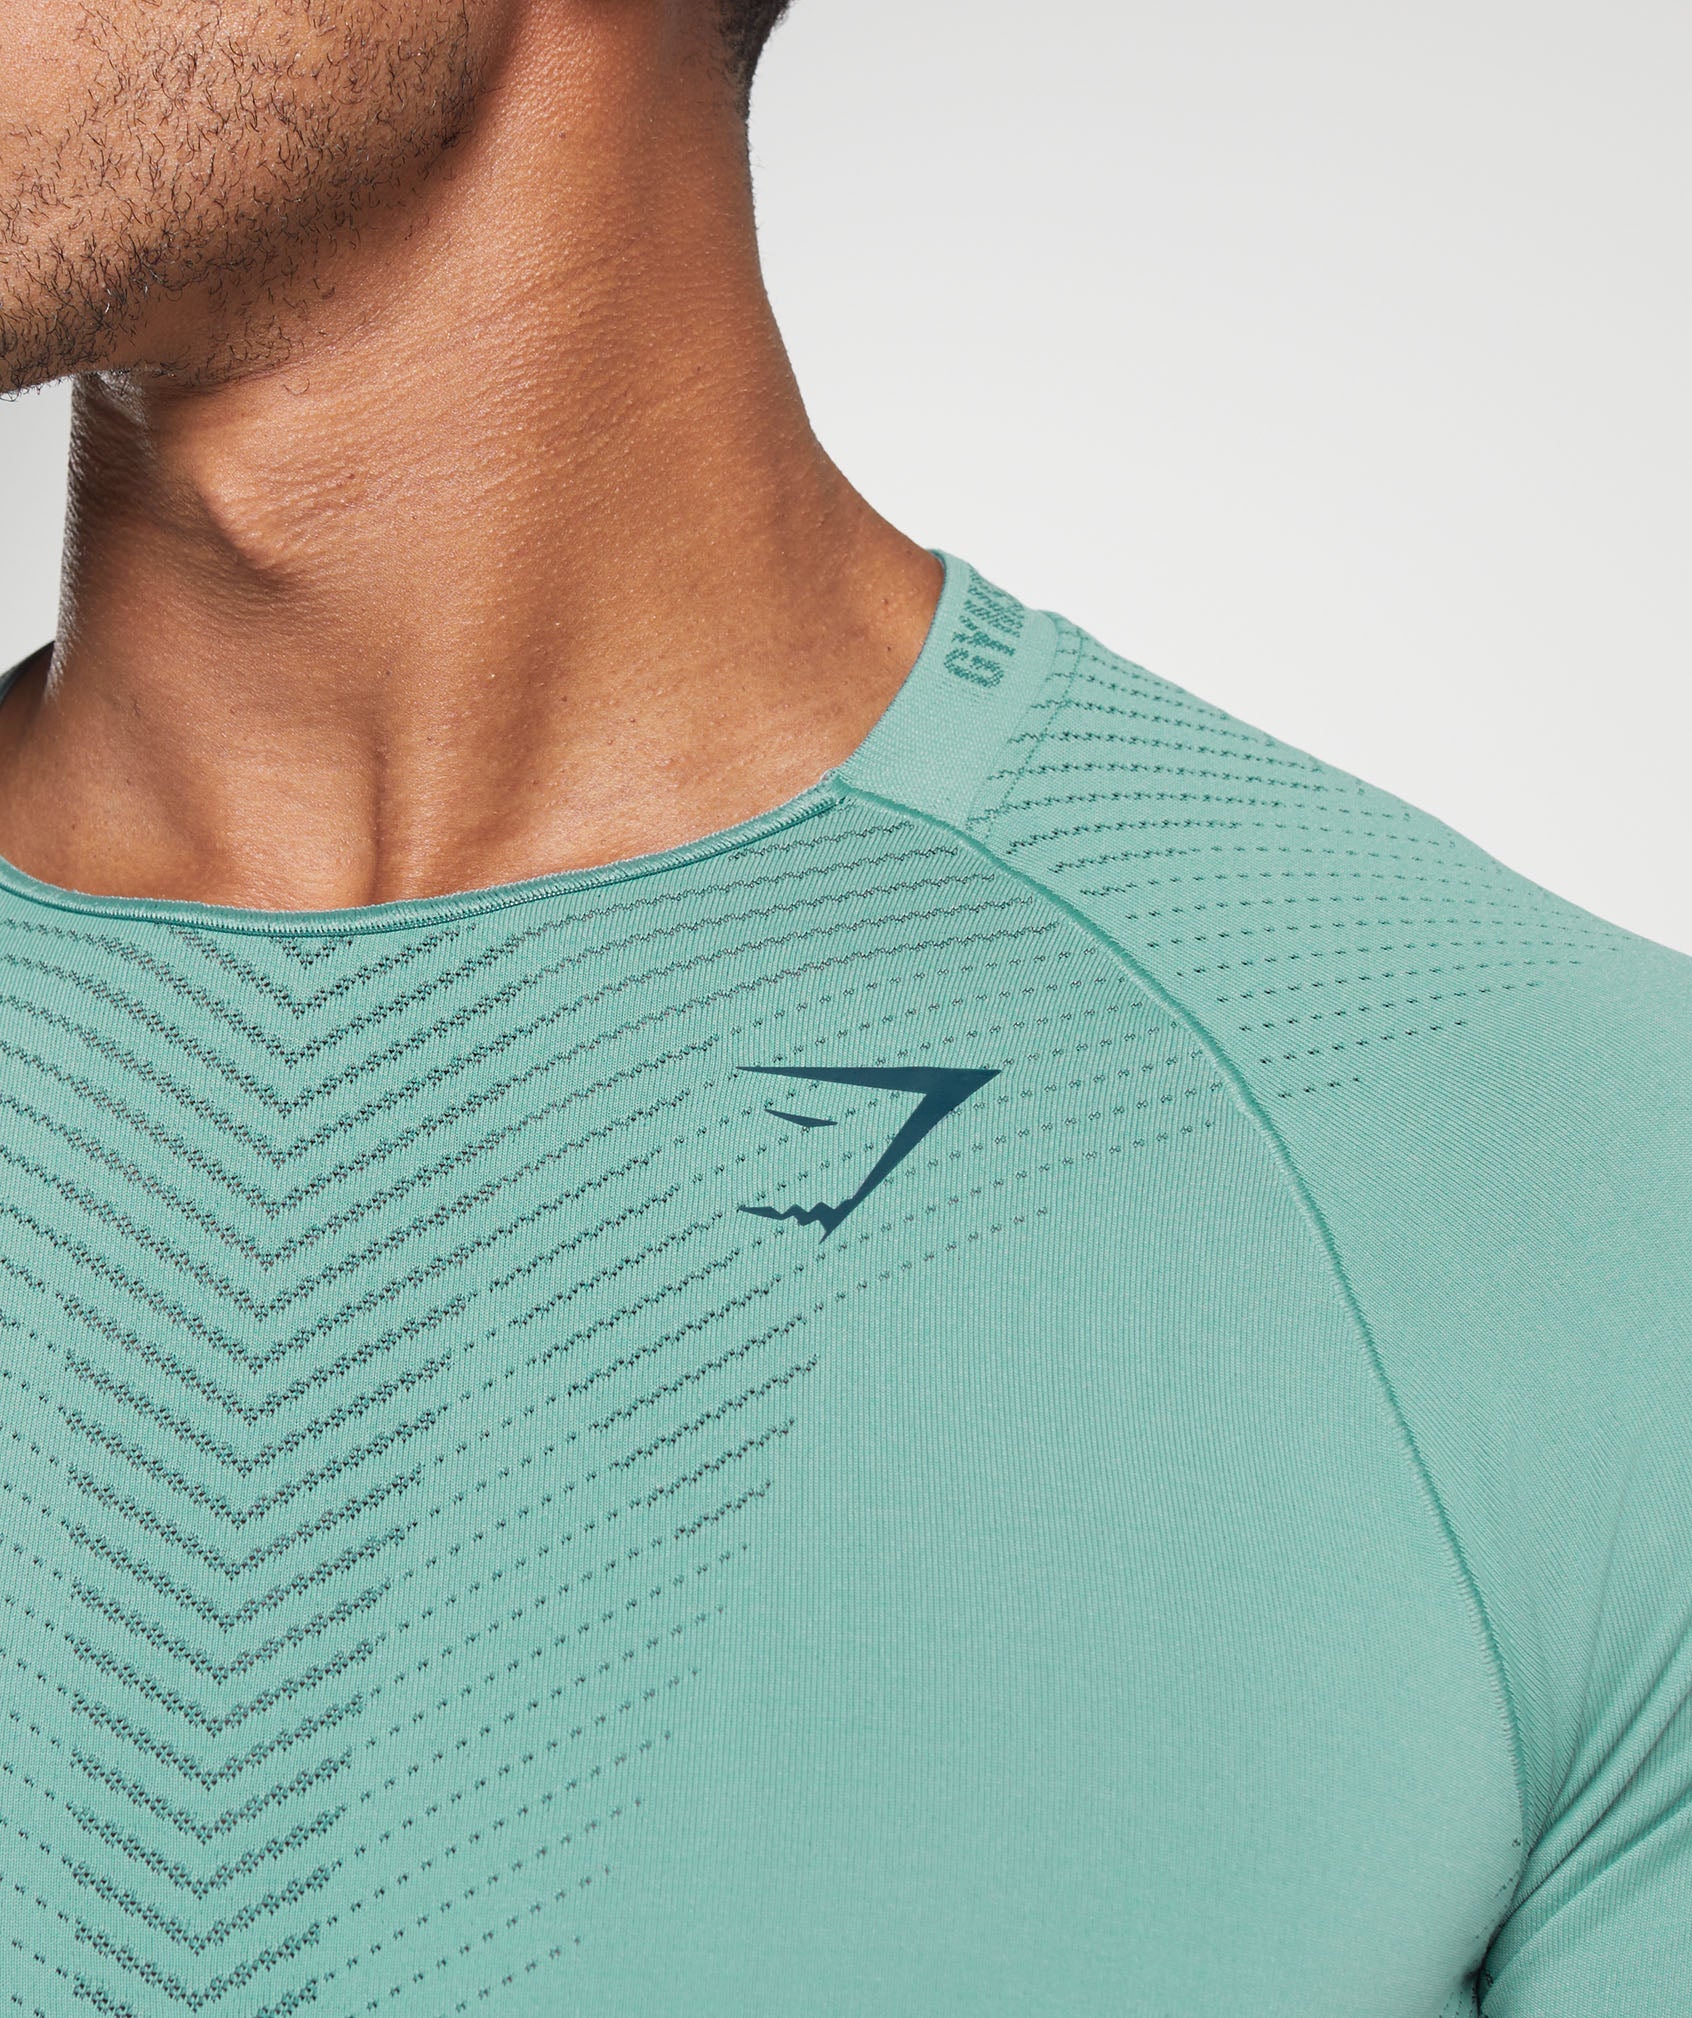 Apex Seamless T-Shirt in Duck Egg Blue/Smokey Teal - view 5